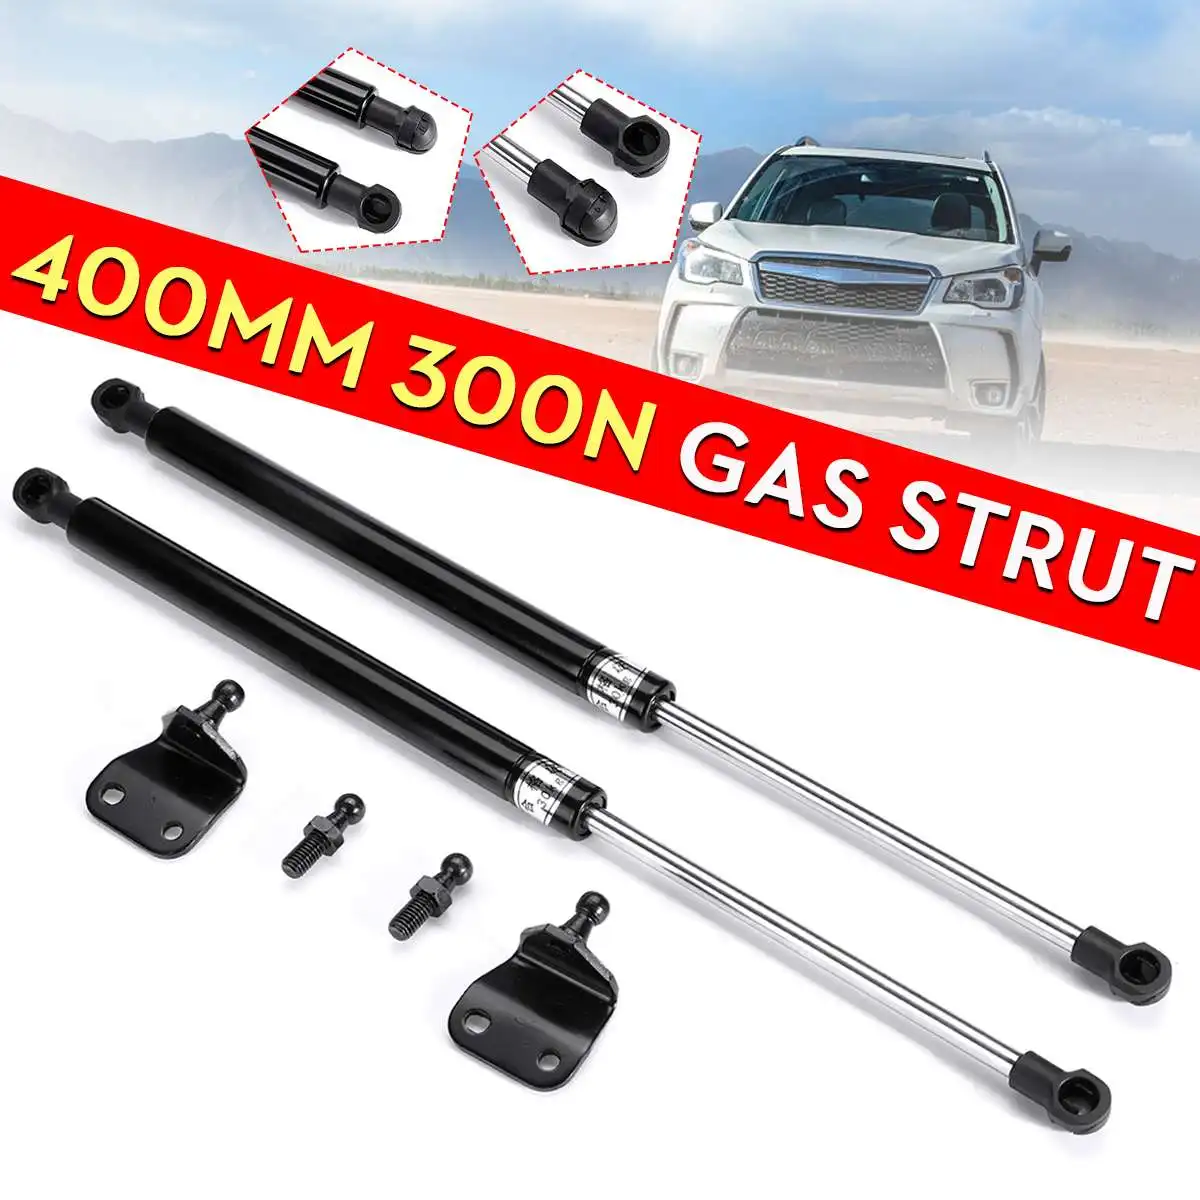 Cabinet 6mm Shaft Gas Strut 195mm-300n x1 Trailers Bonnet Canopy Toolboxes 